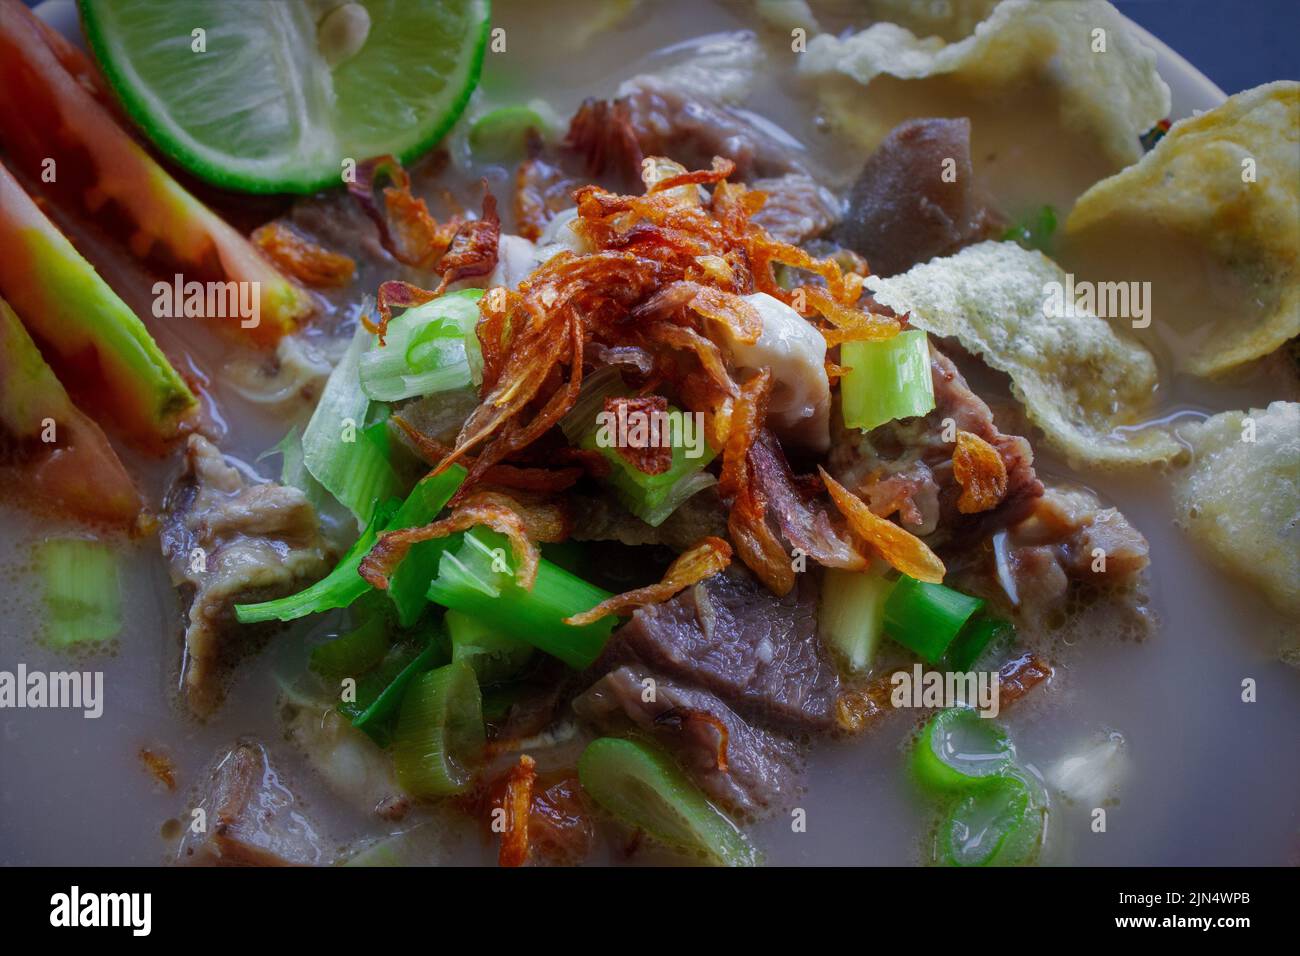 sop kaki kambing a traditional food from Betawi, Jakarta Indonesia, made from mutton or lamb, offal, spices. isolated on black background.This food is Stock Photo